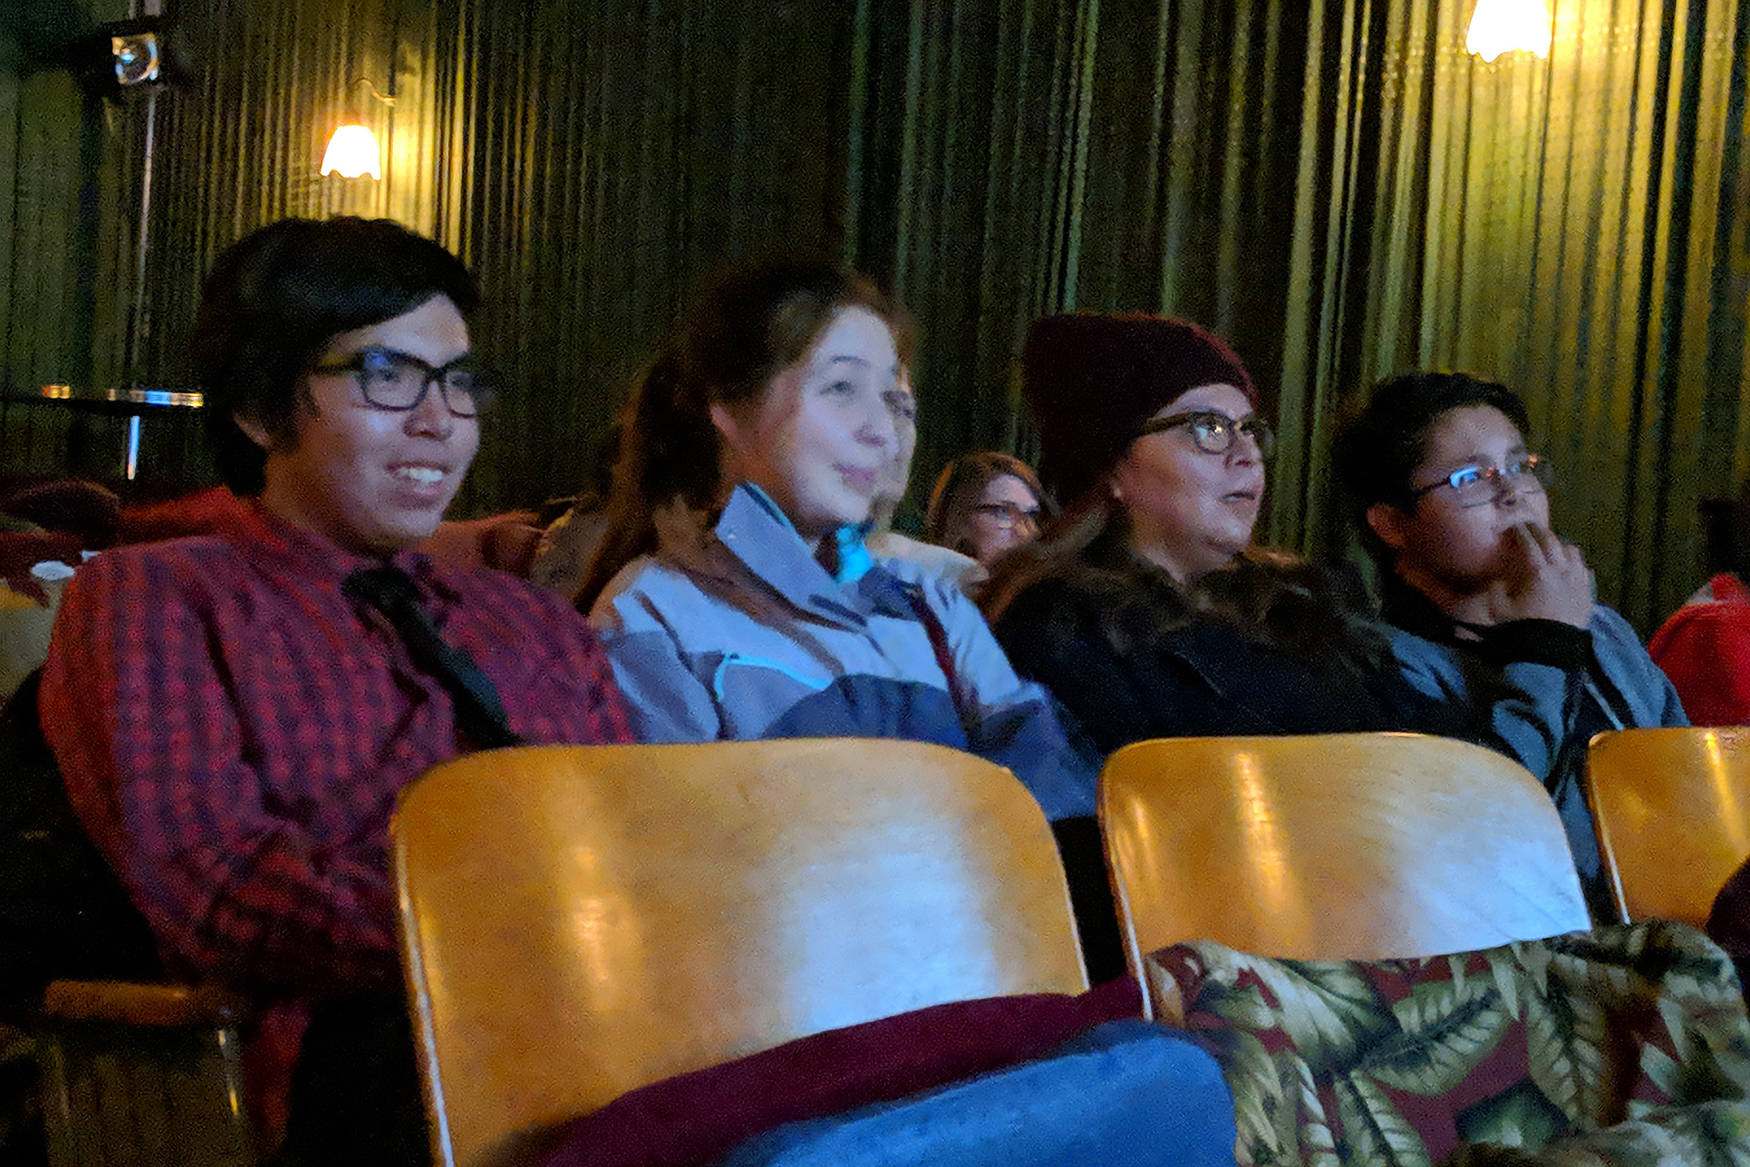 Michael Martin Jr., whose short film “Adapt” screened during a showing of “Our Alaskan Stories” watches his movie with his girlfriend, Annie Masterman; mom, Michelle Martin; and brother, Micheel Martin at Gold Town Nickelodeon Saturday, Nov. 17. (Ben Hohenstatt | Capital City Weekly)